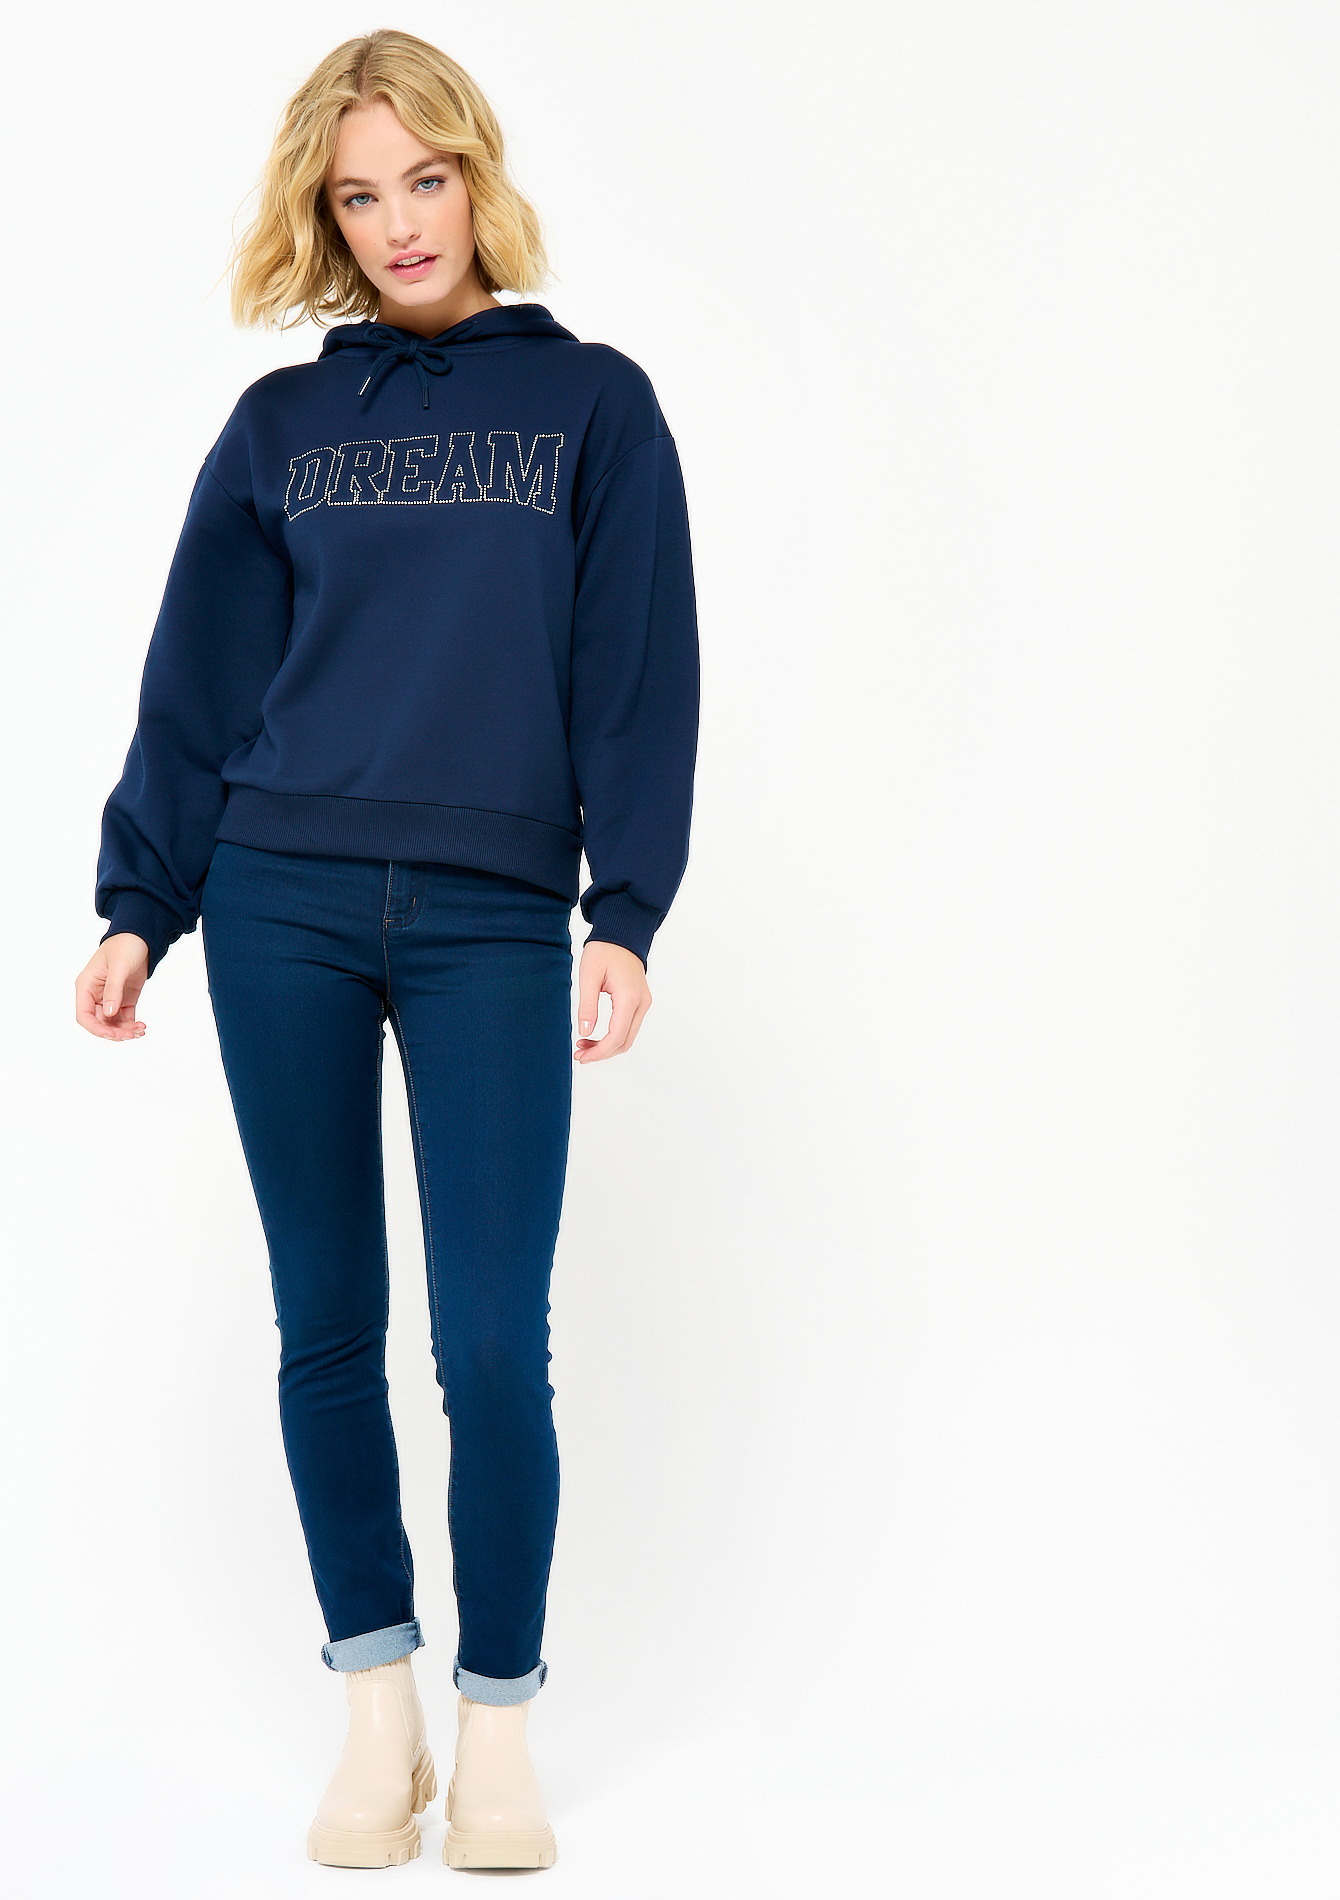 Hooded jumper with text - NAVY BLUE - 03001652_1651